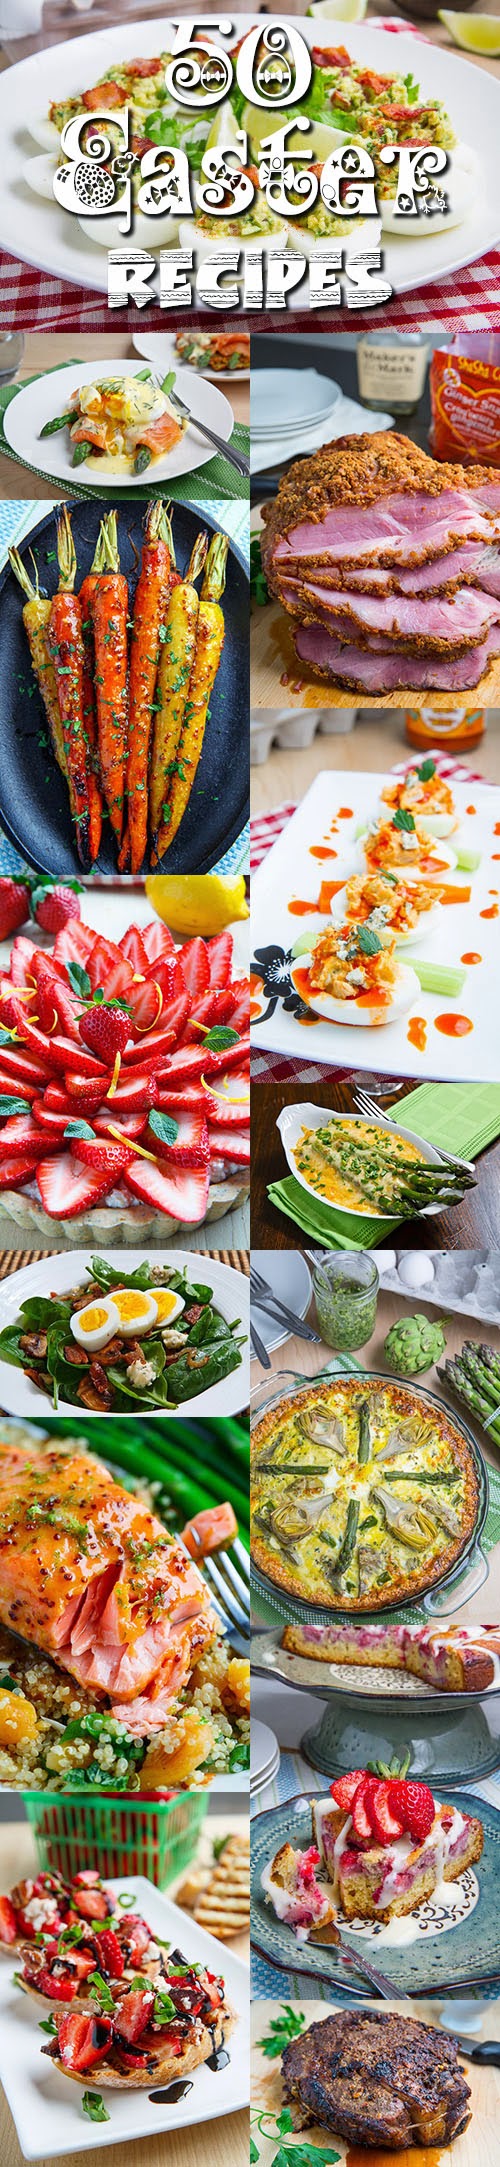 50 Easter Recipes